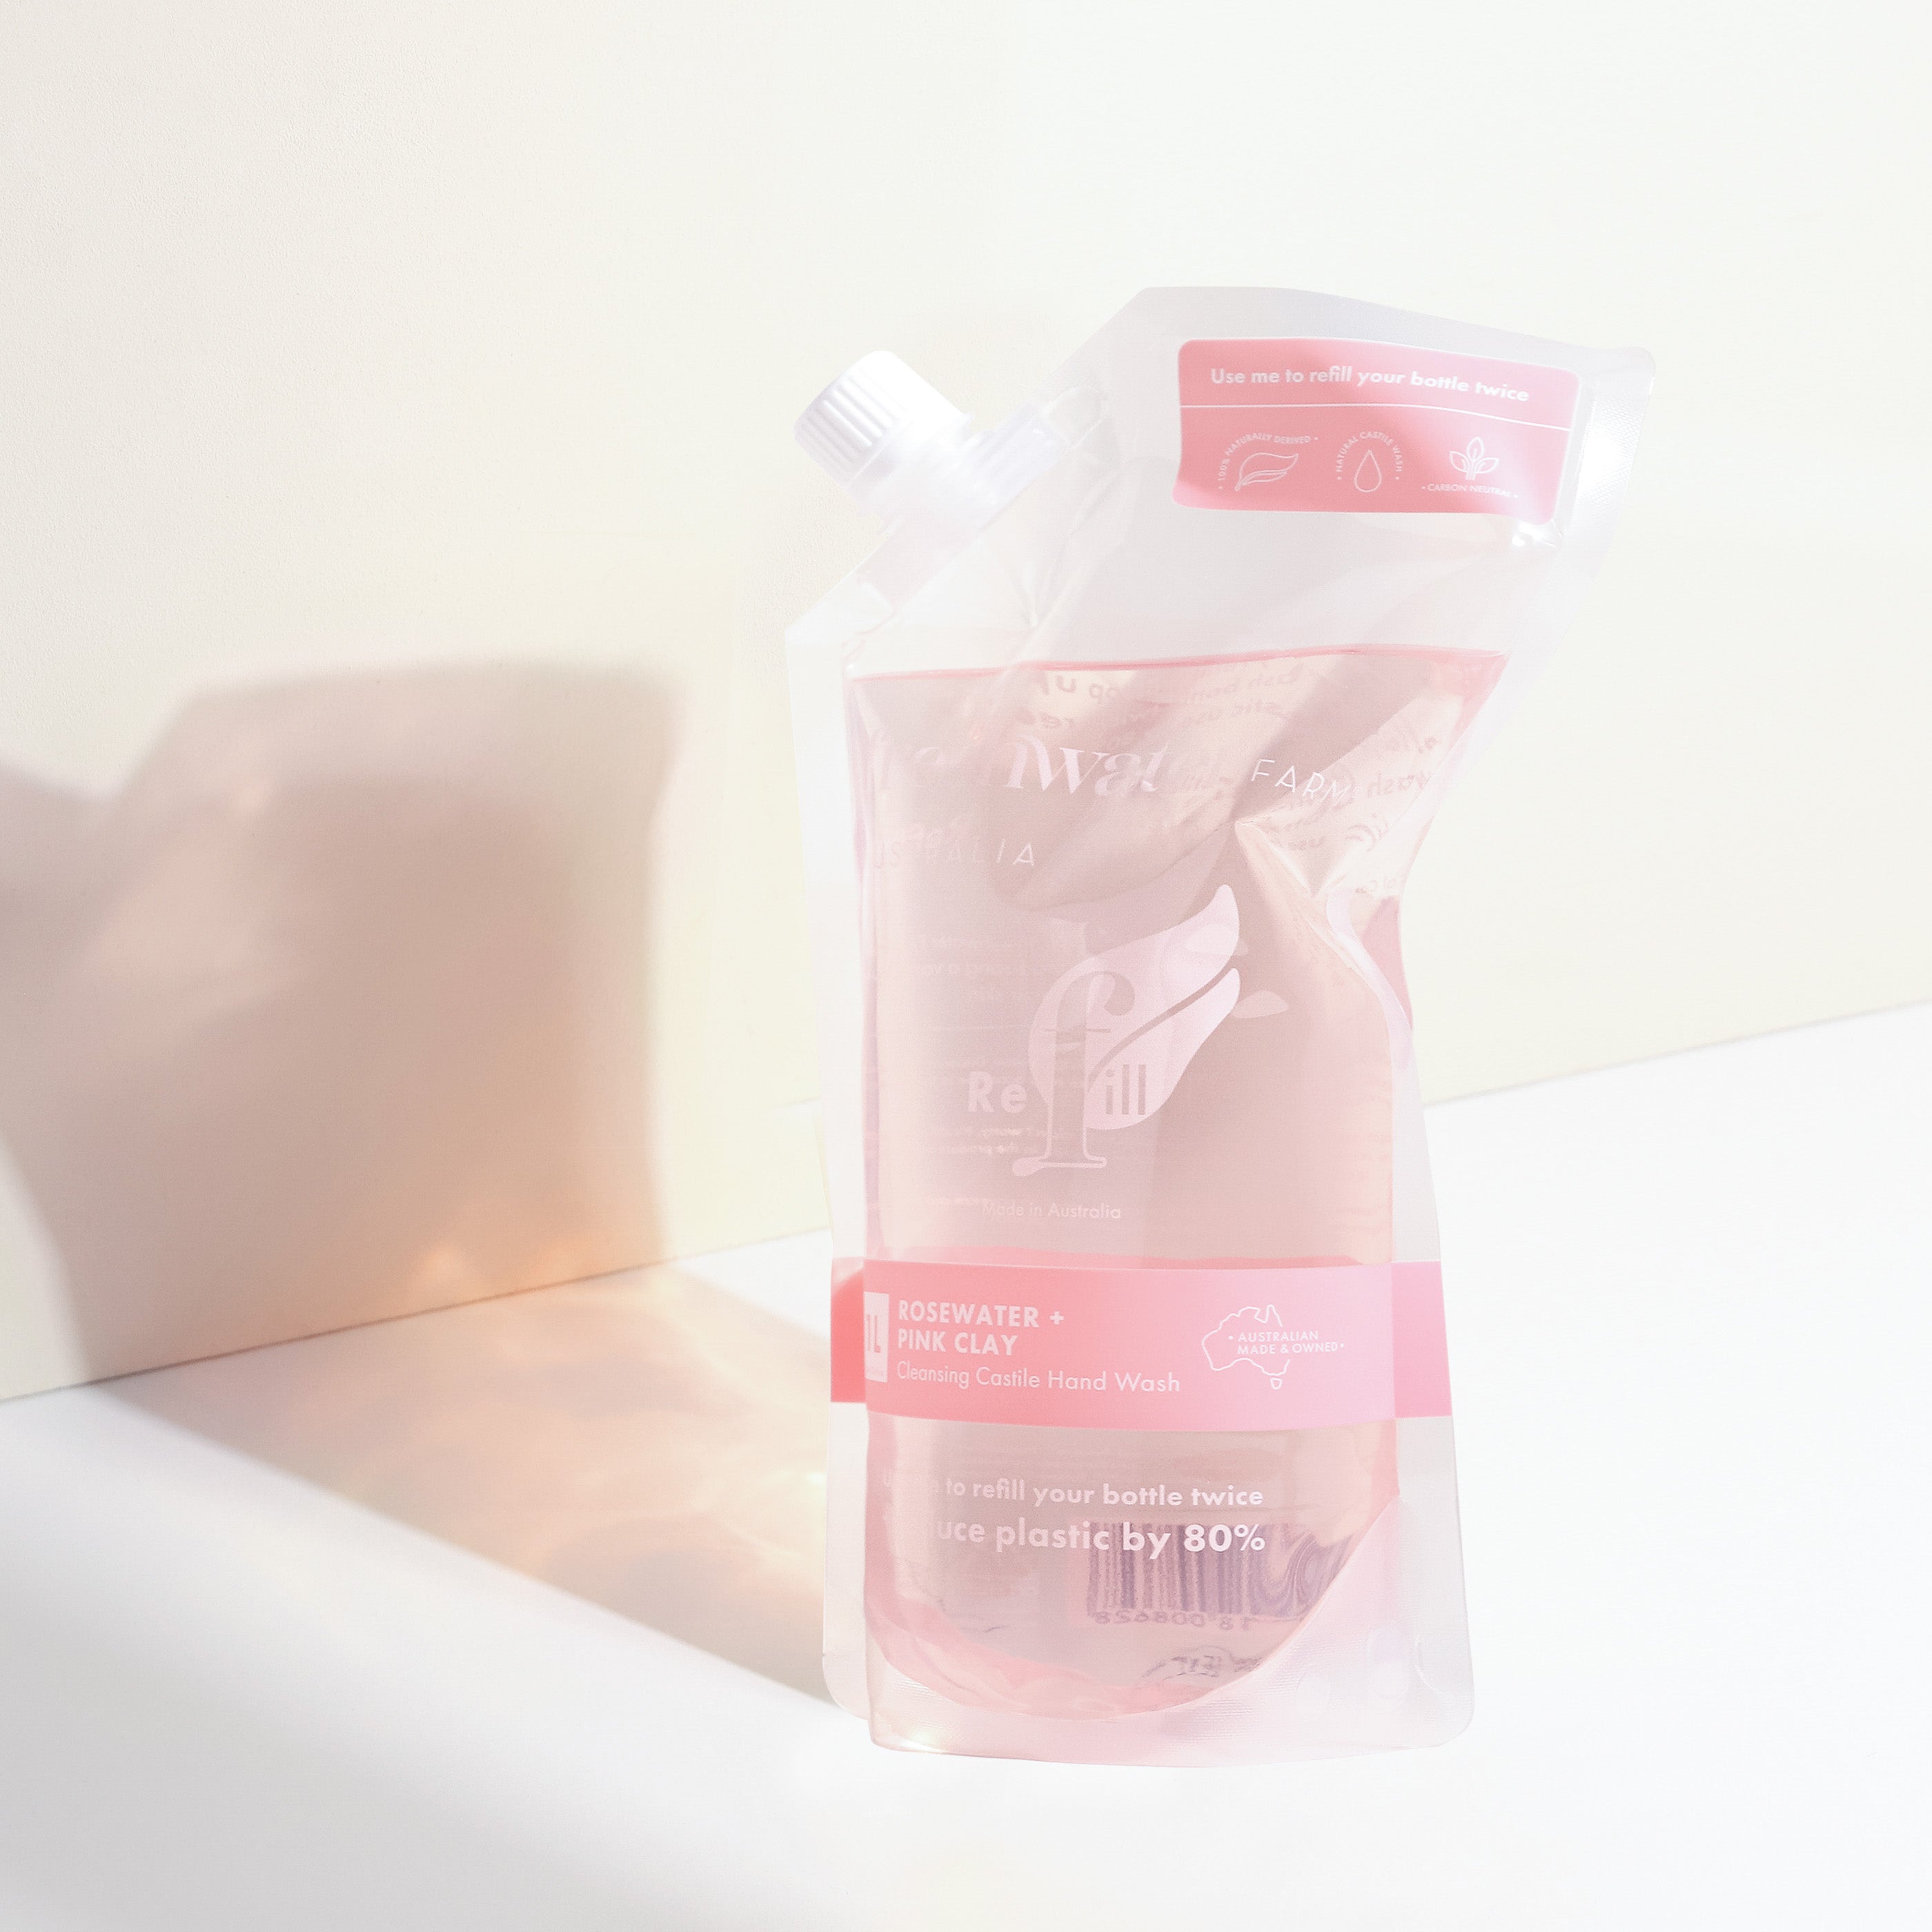 HAND WASH REFILL | Cleansing Rosewater + Pink Clay Pouch Refill 1L